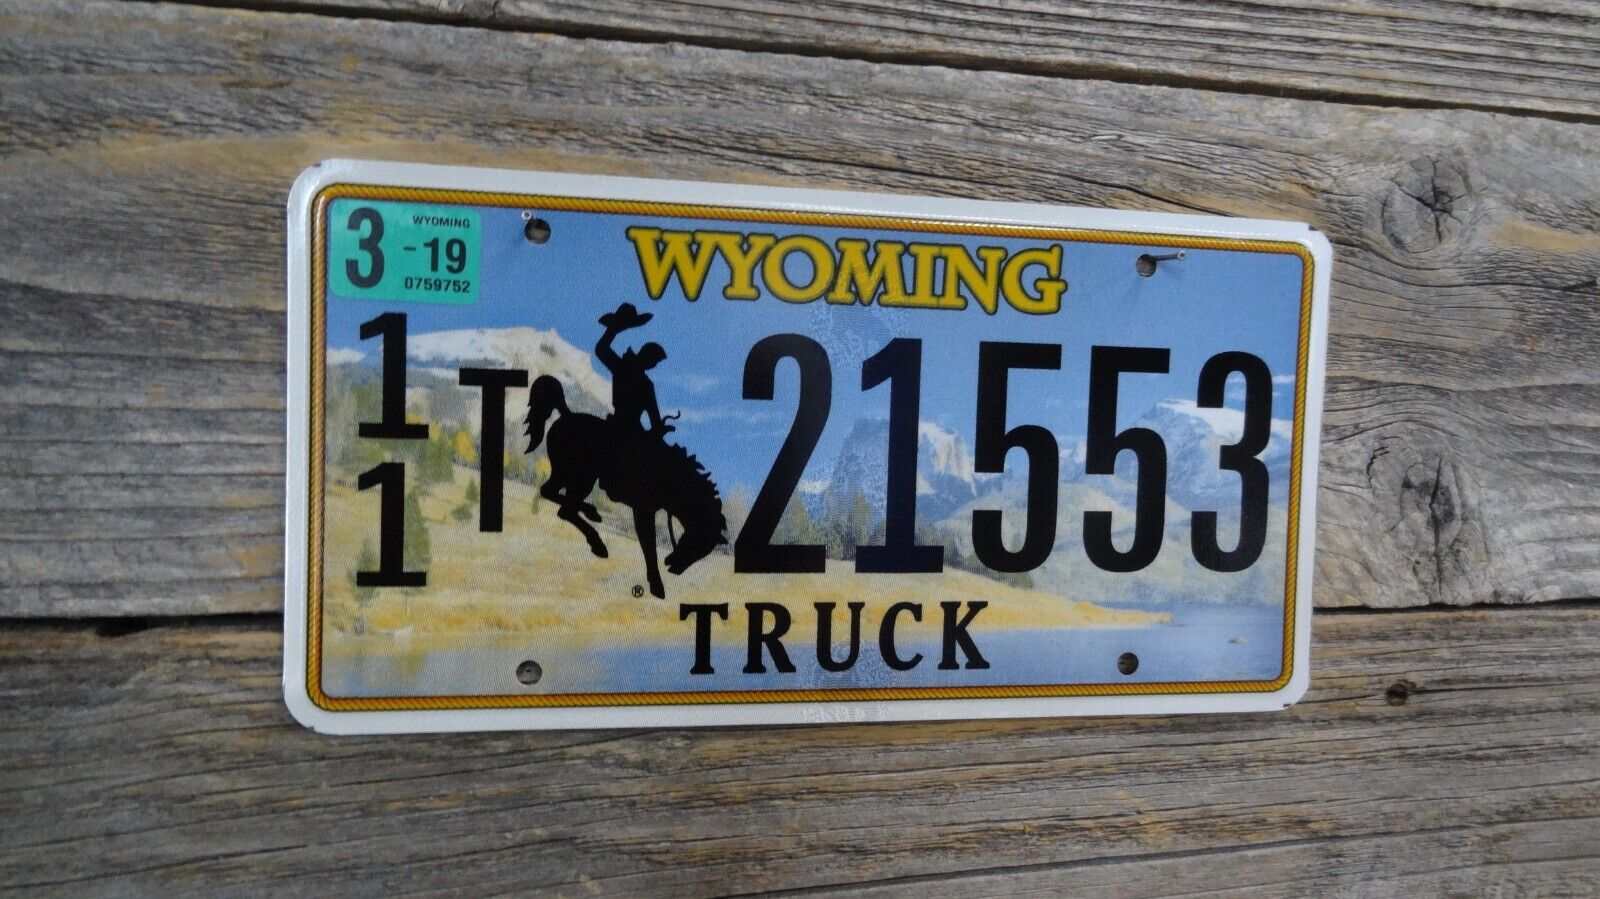 Wyoming Truck new issue font license plate with bucking horse Wyoming plate